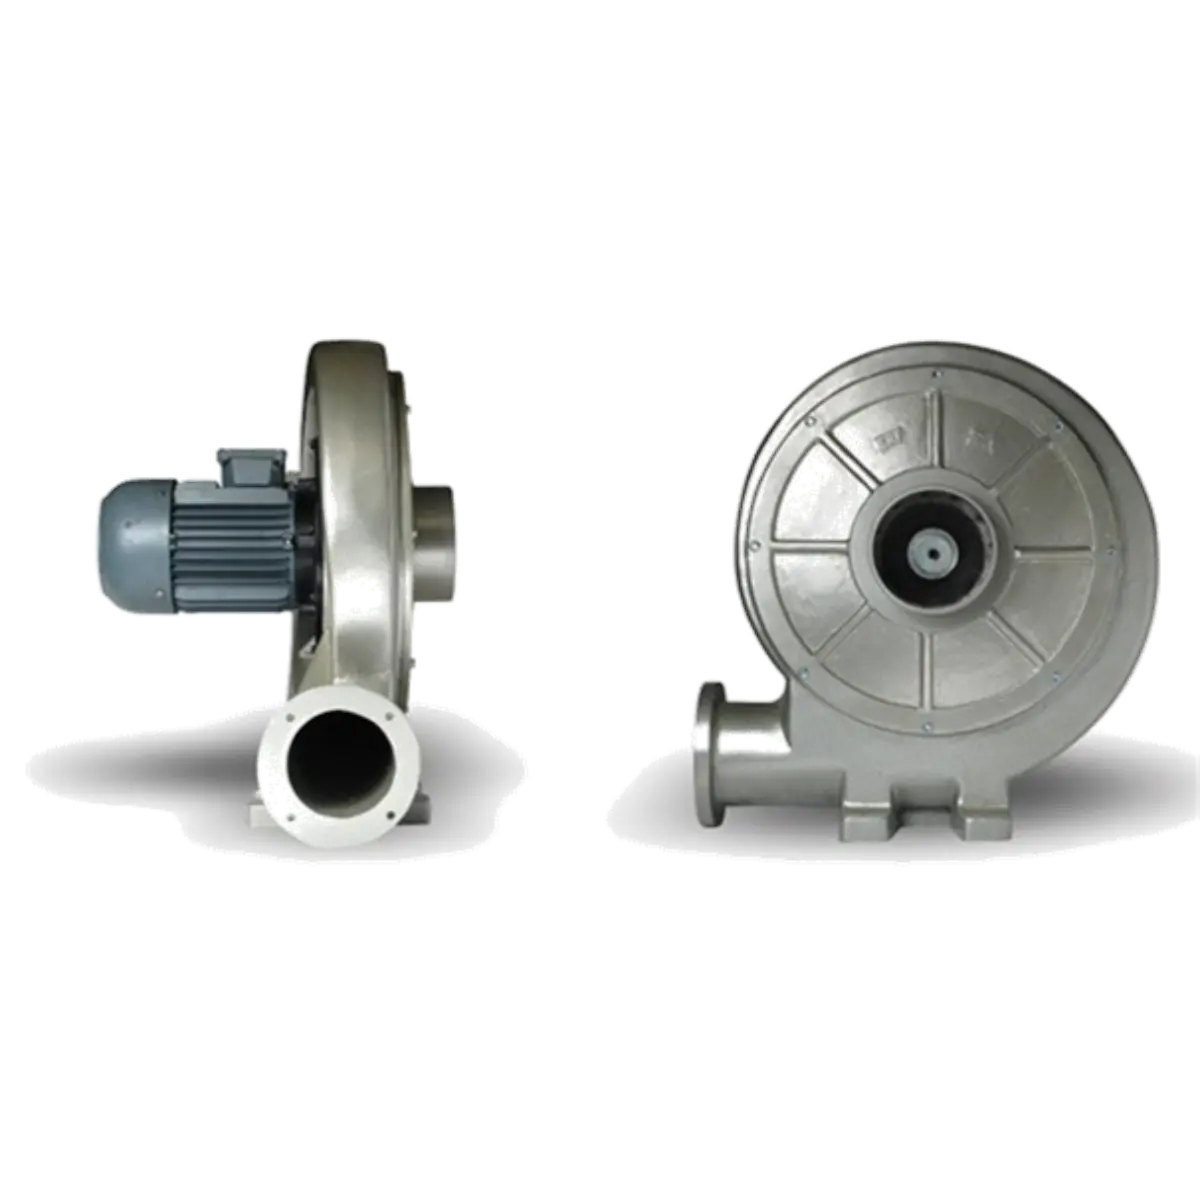 Industrial air blowers suitable for a variety of applications